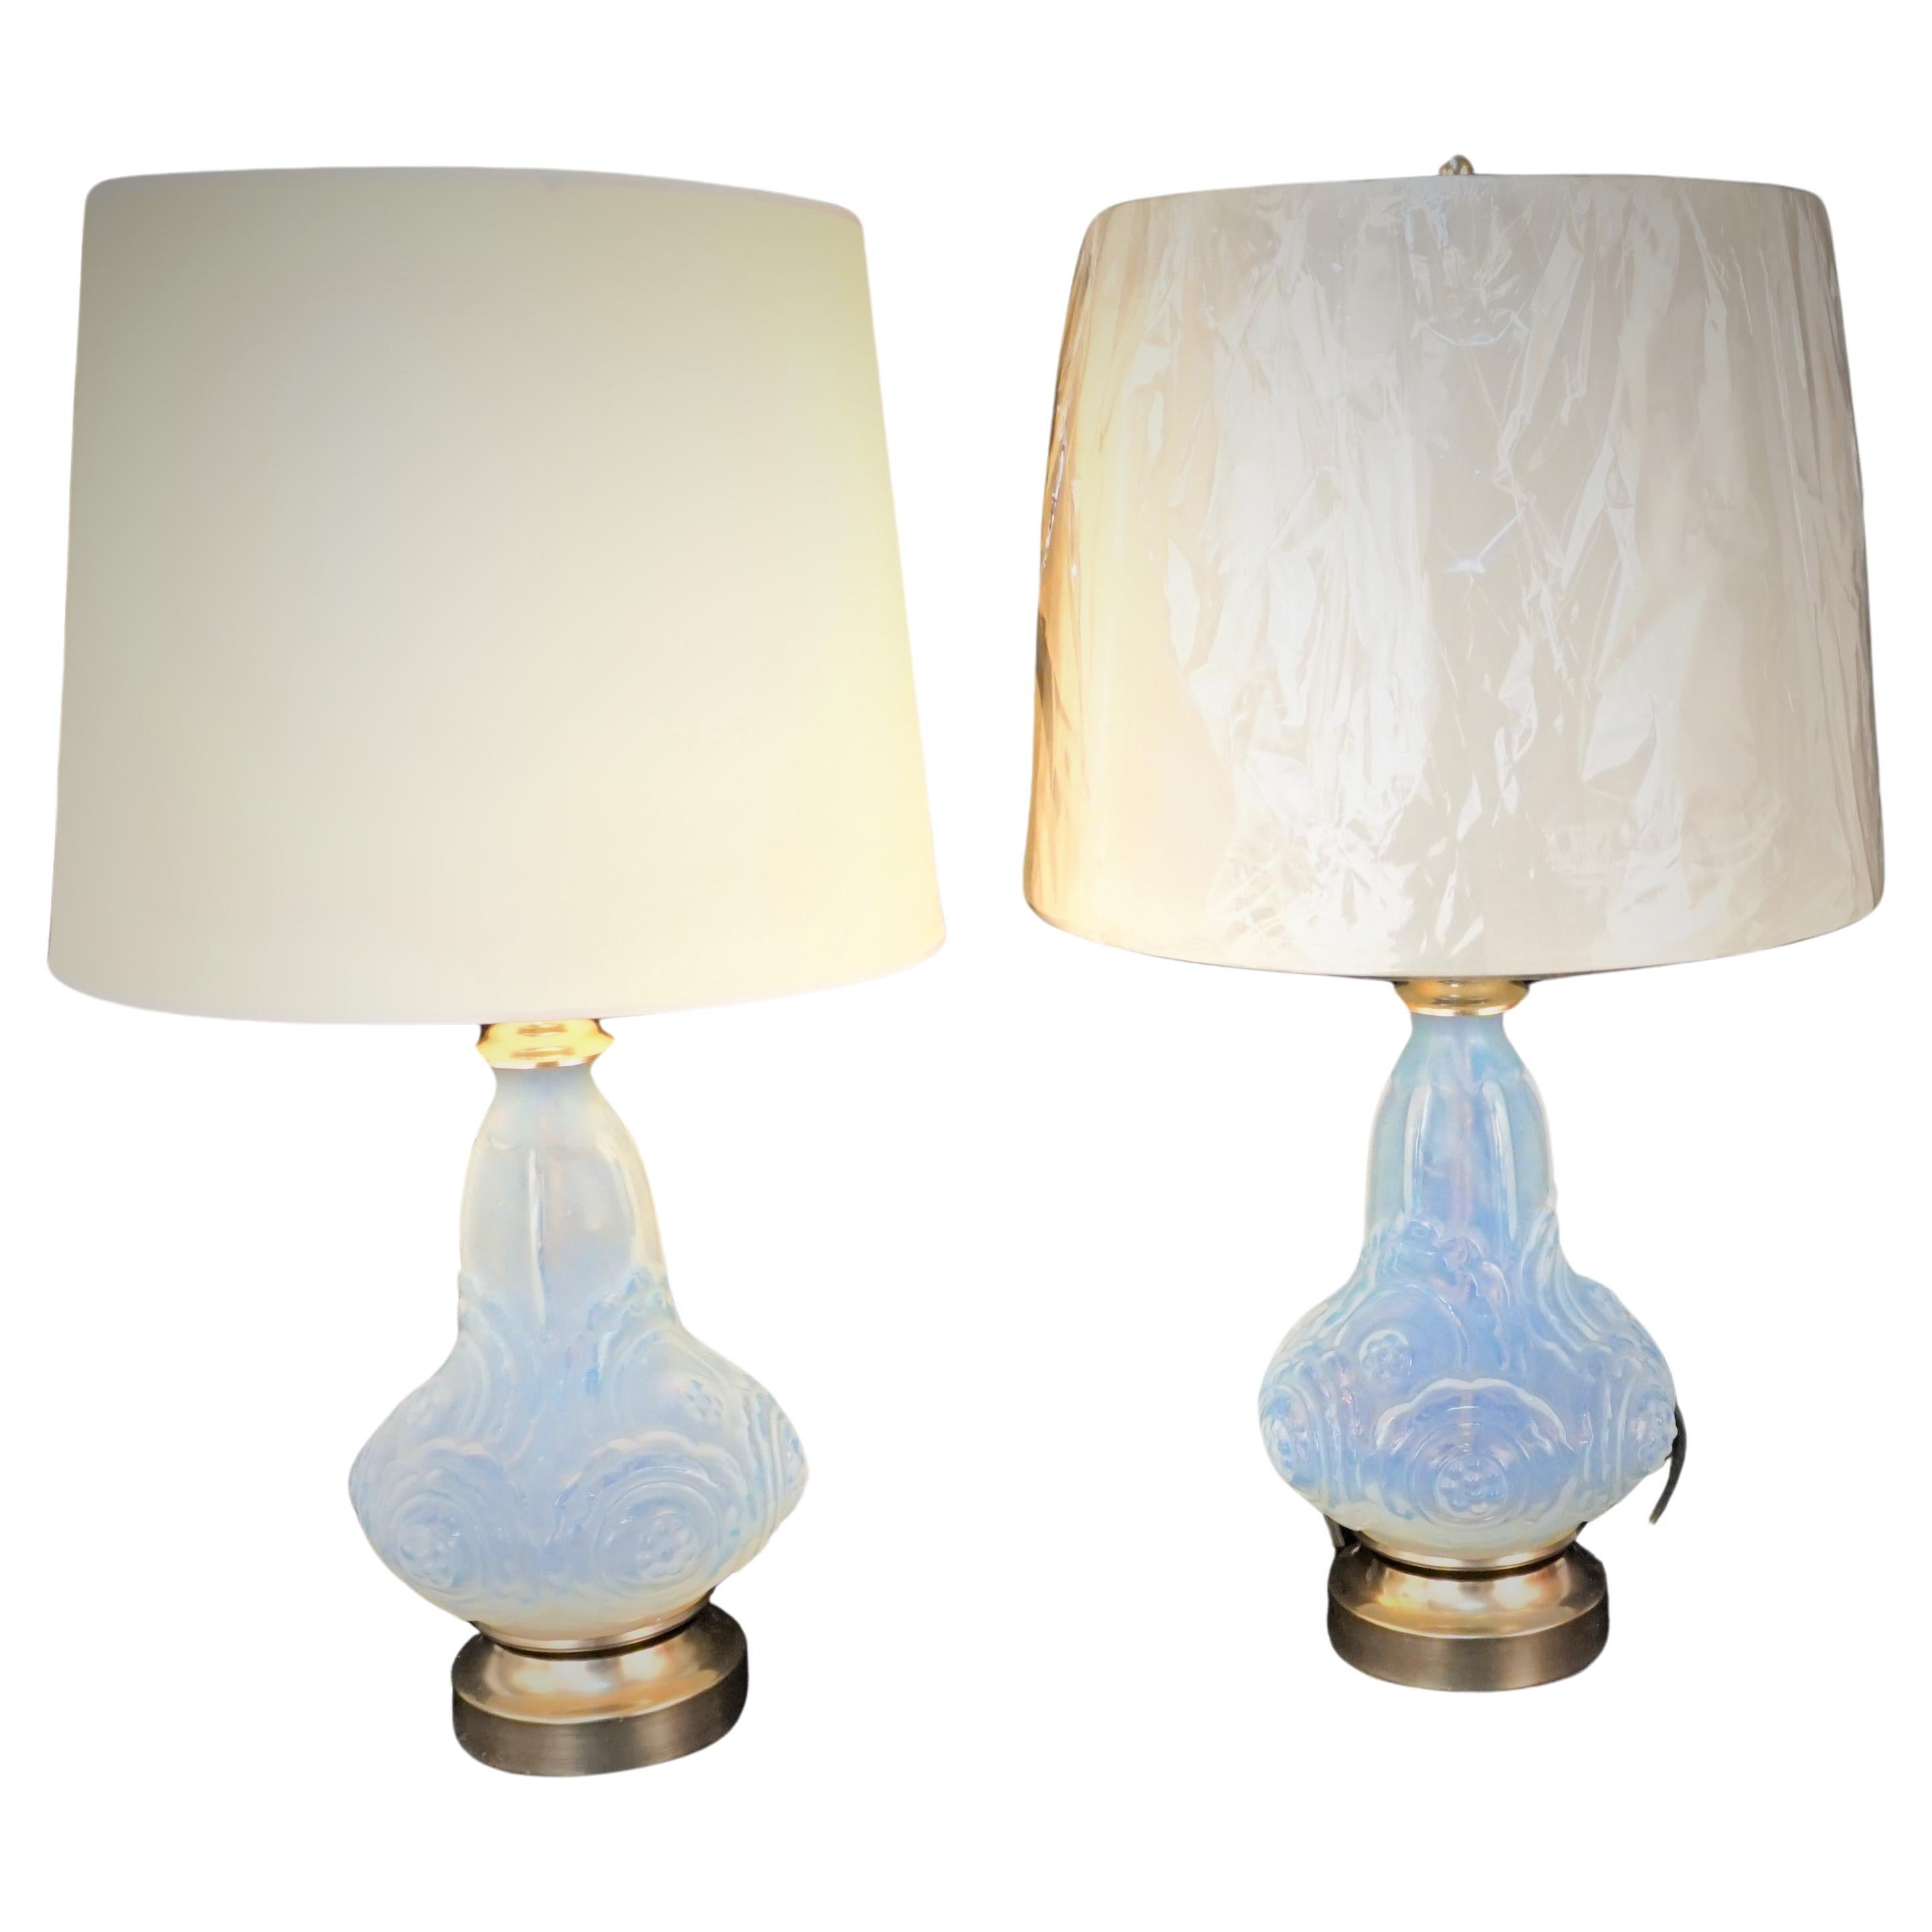 Pair of 1920's Art Deco Opaline Glass Table Lamps